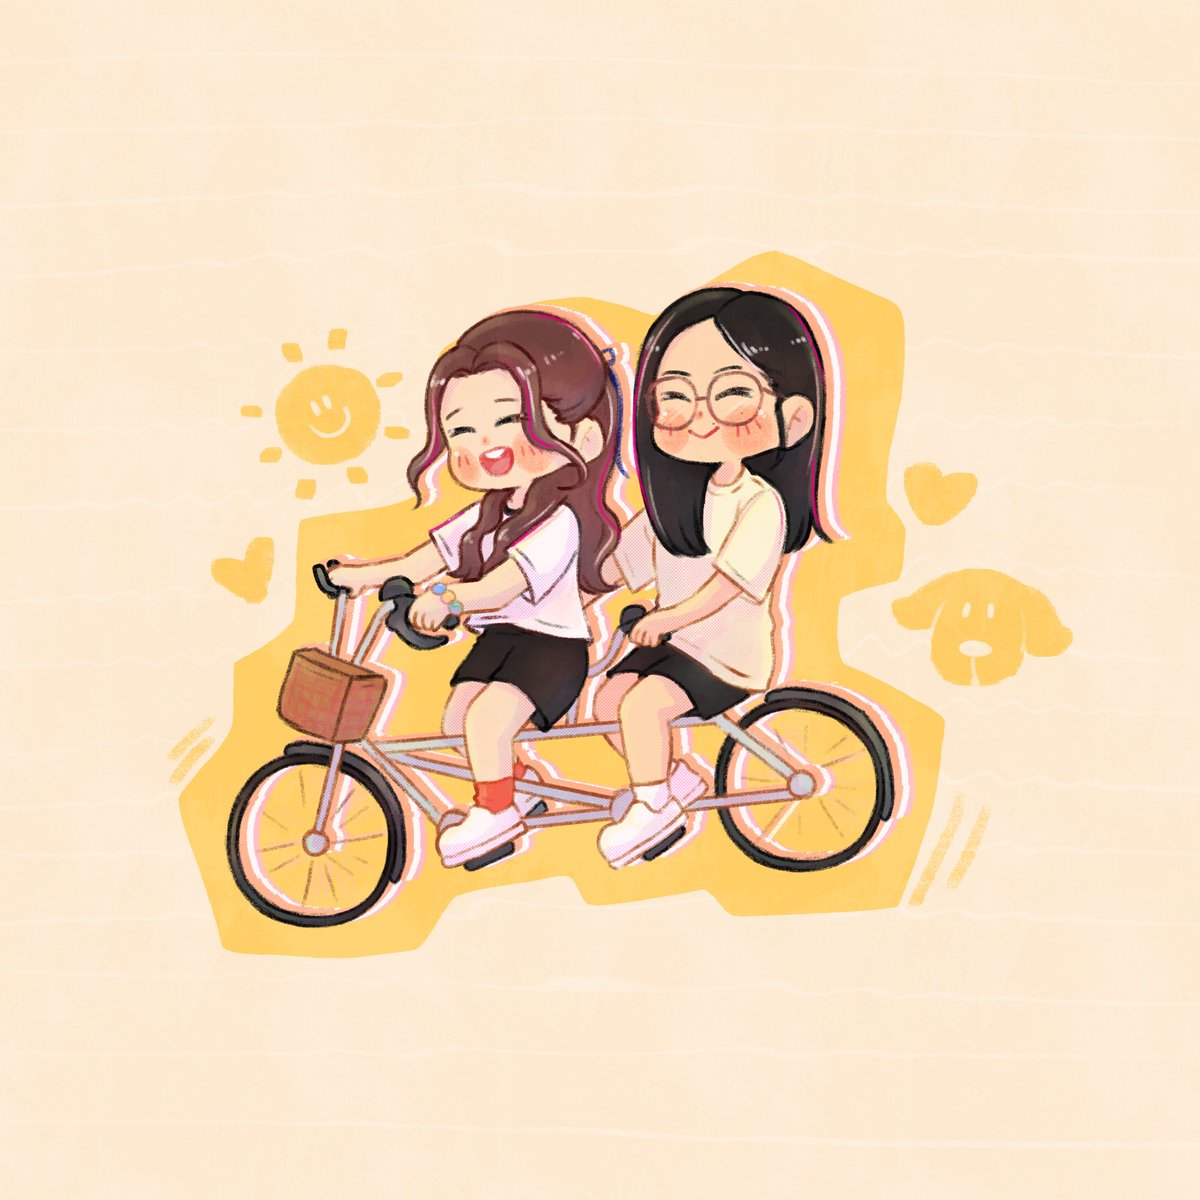 bike date 🚲🫶
#23point5 #23point5ep9